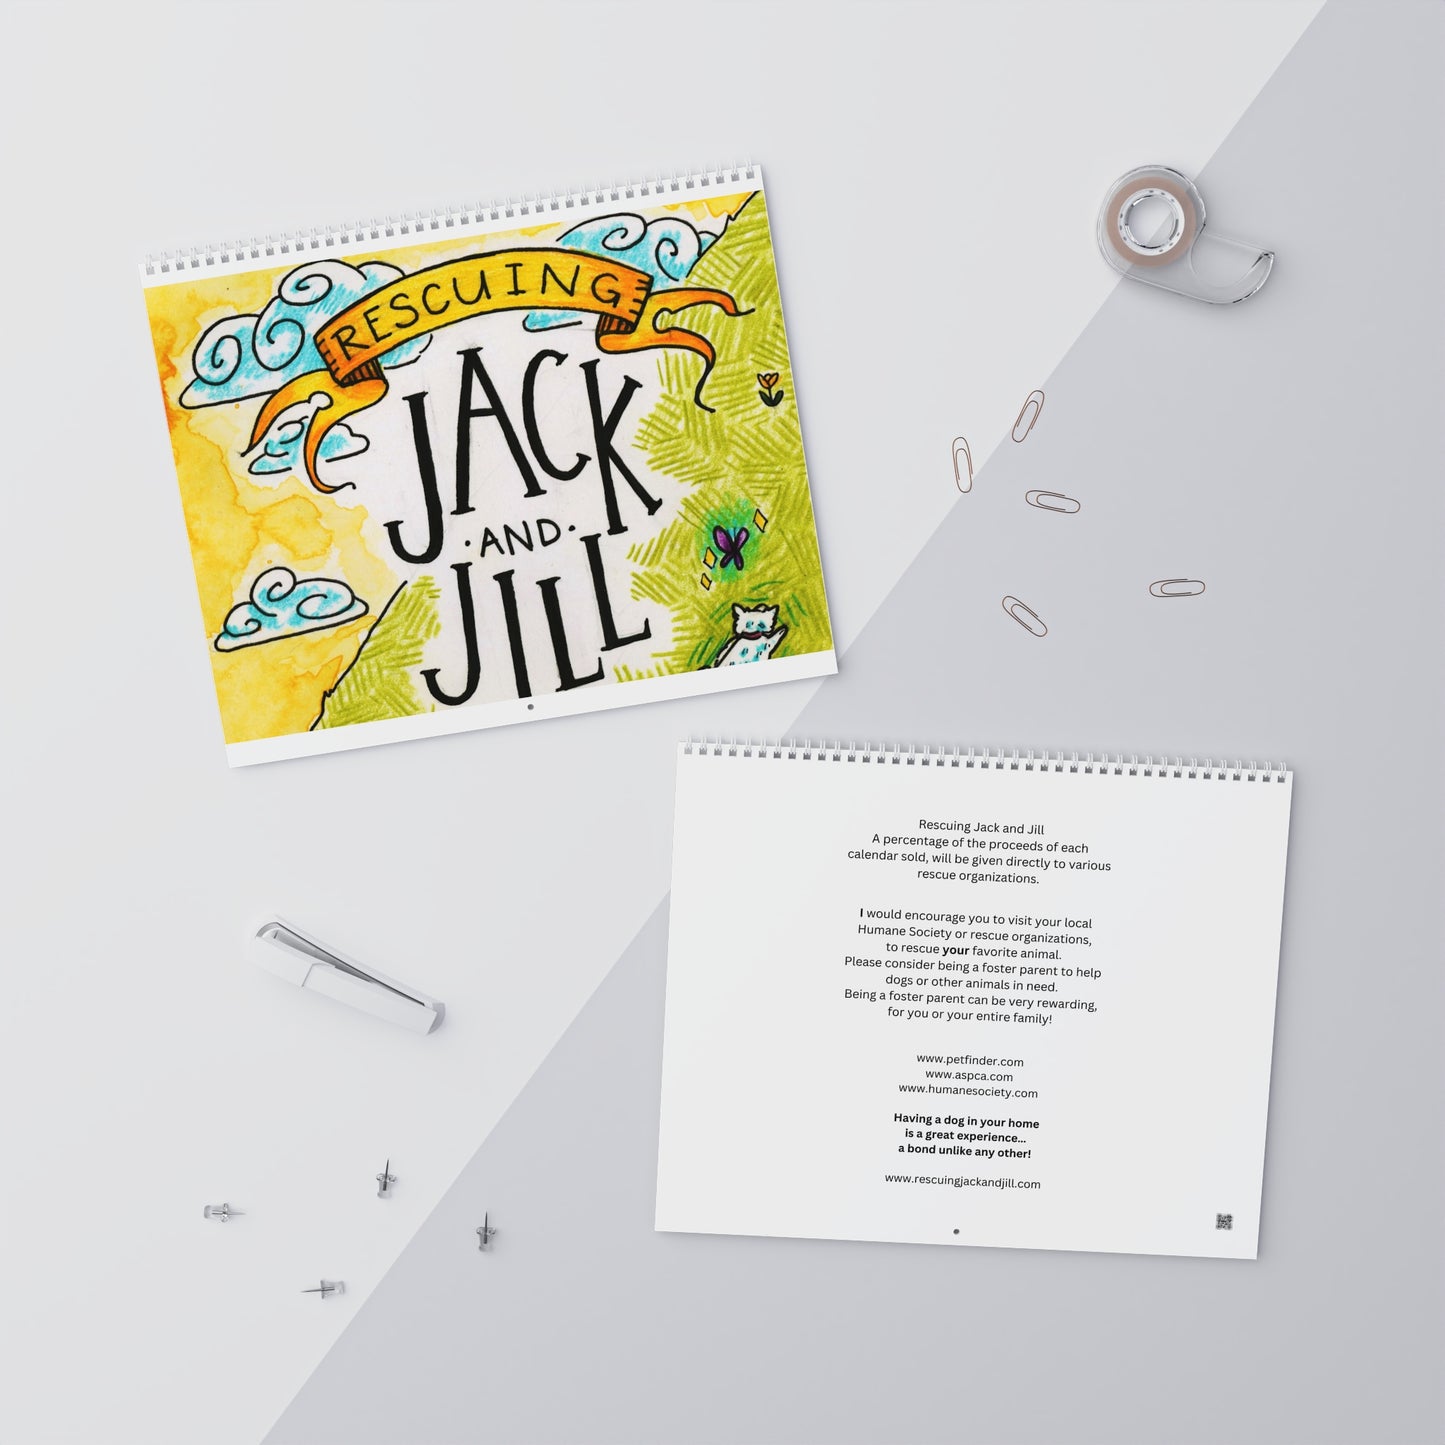 Rescuing Jack and Jill - A real Jack and Jill Story Calendar